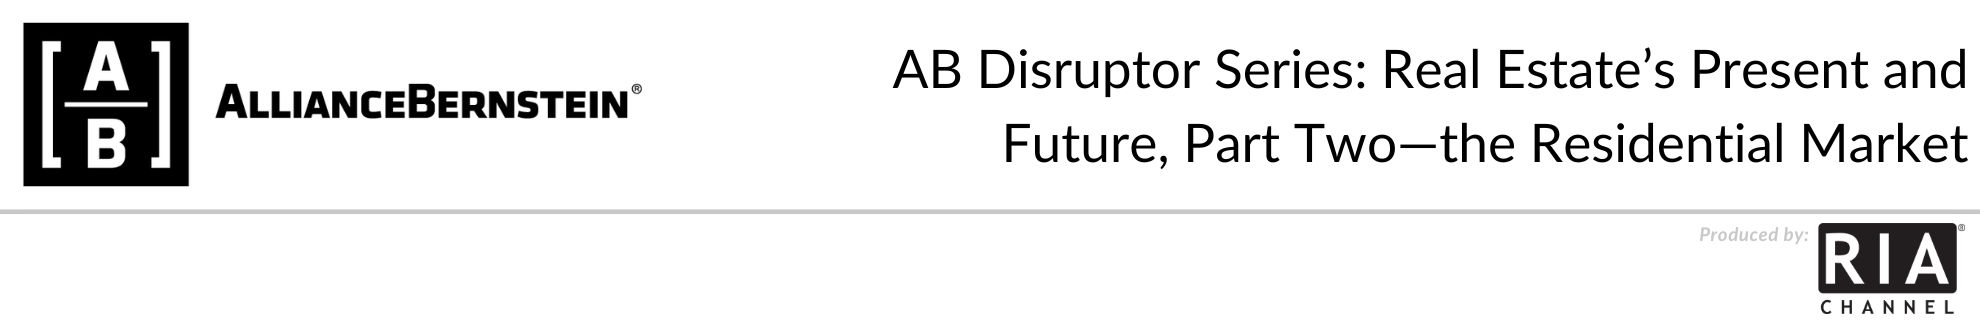 AB Disruptor Series: Real Estate’s Present and Future, Part Two—the Residential Market